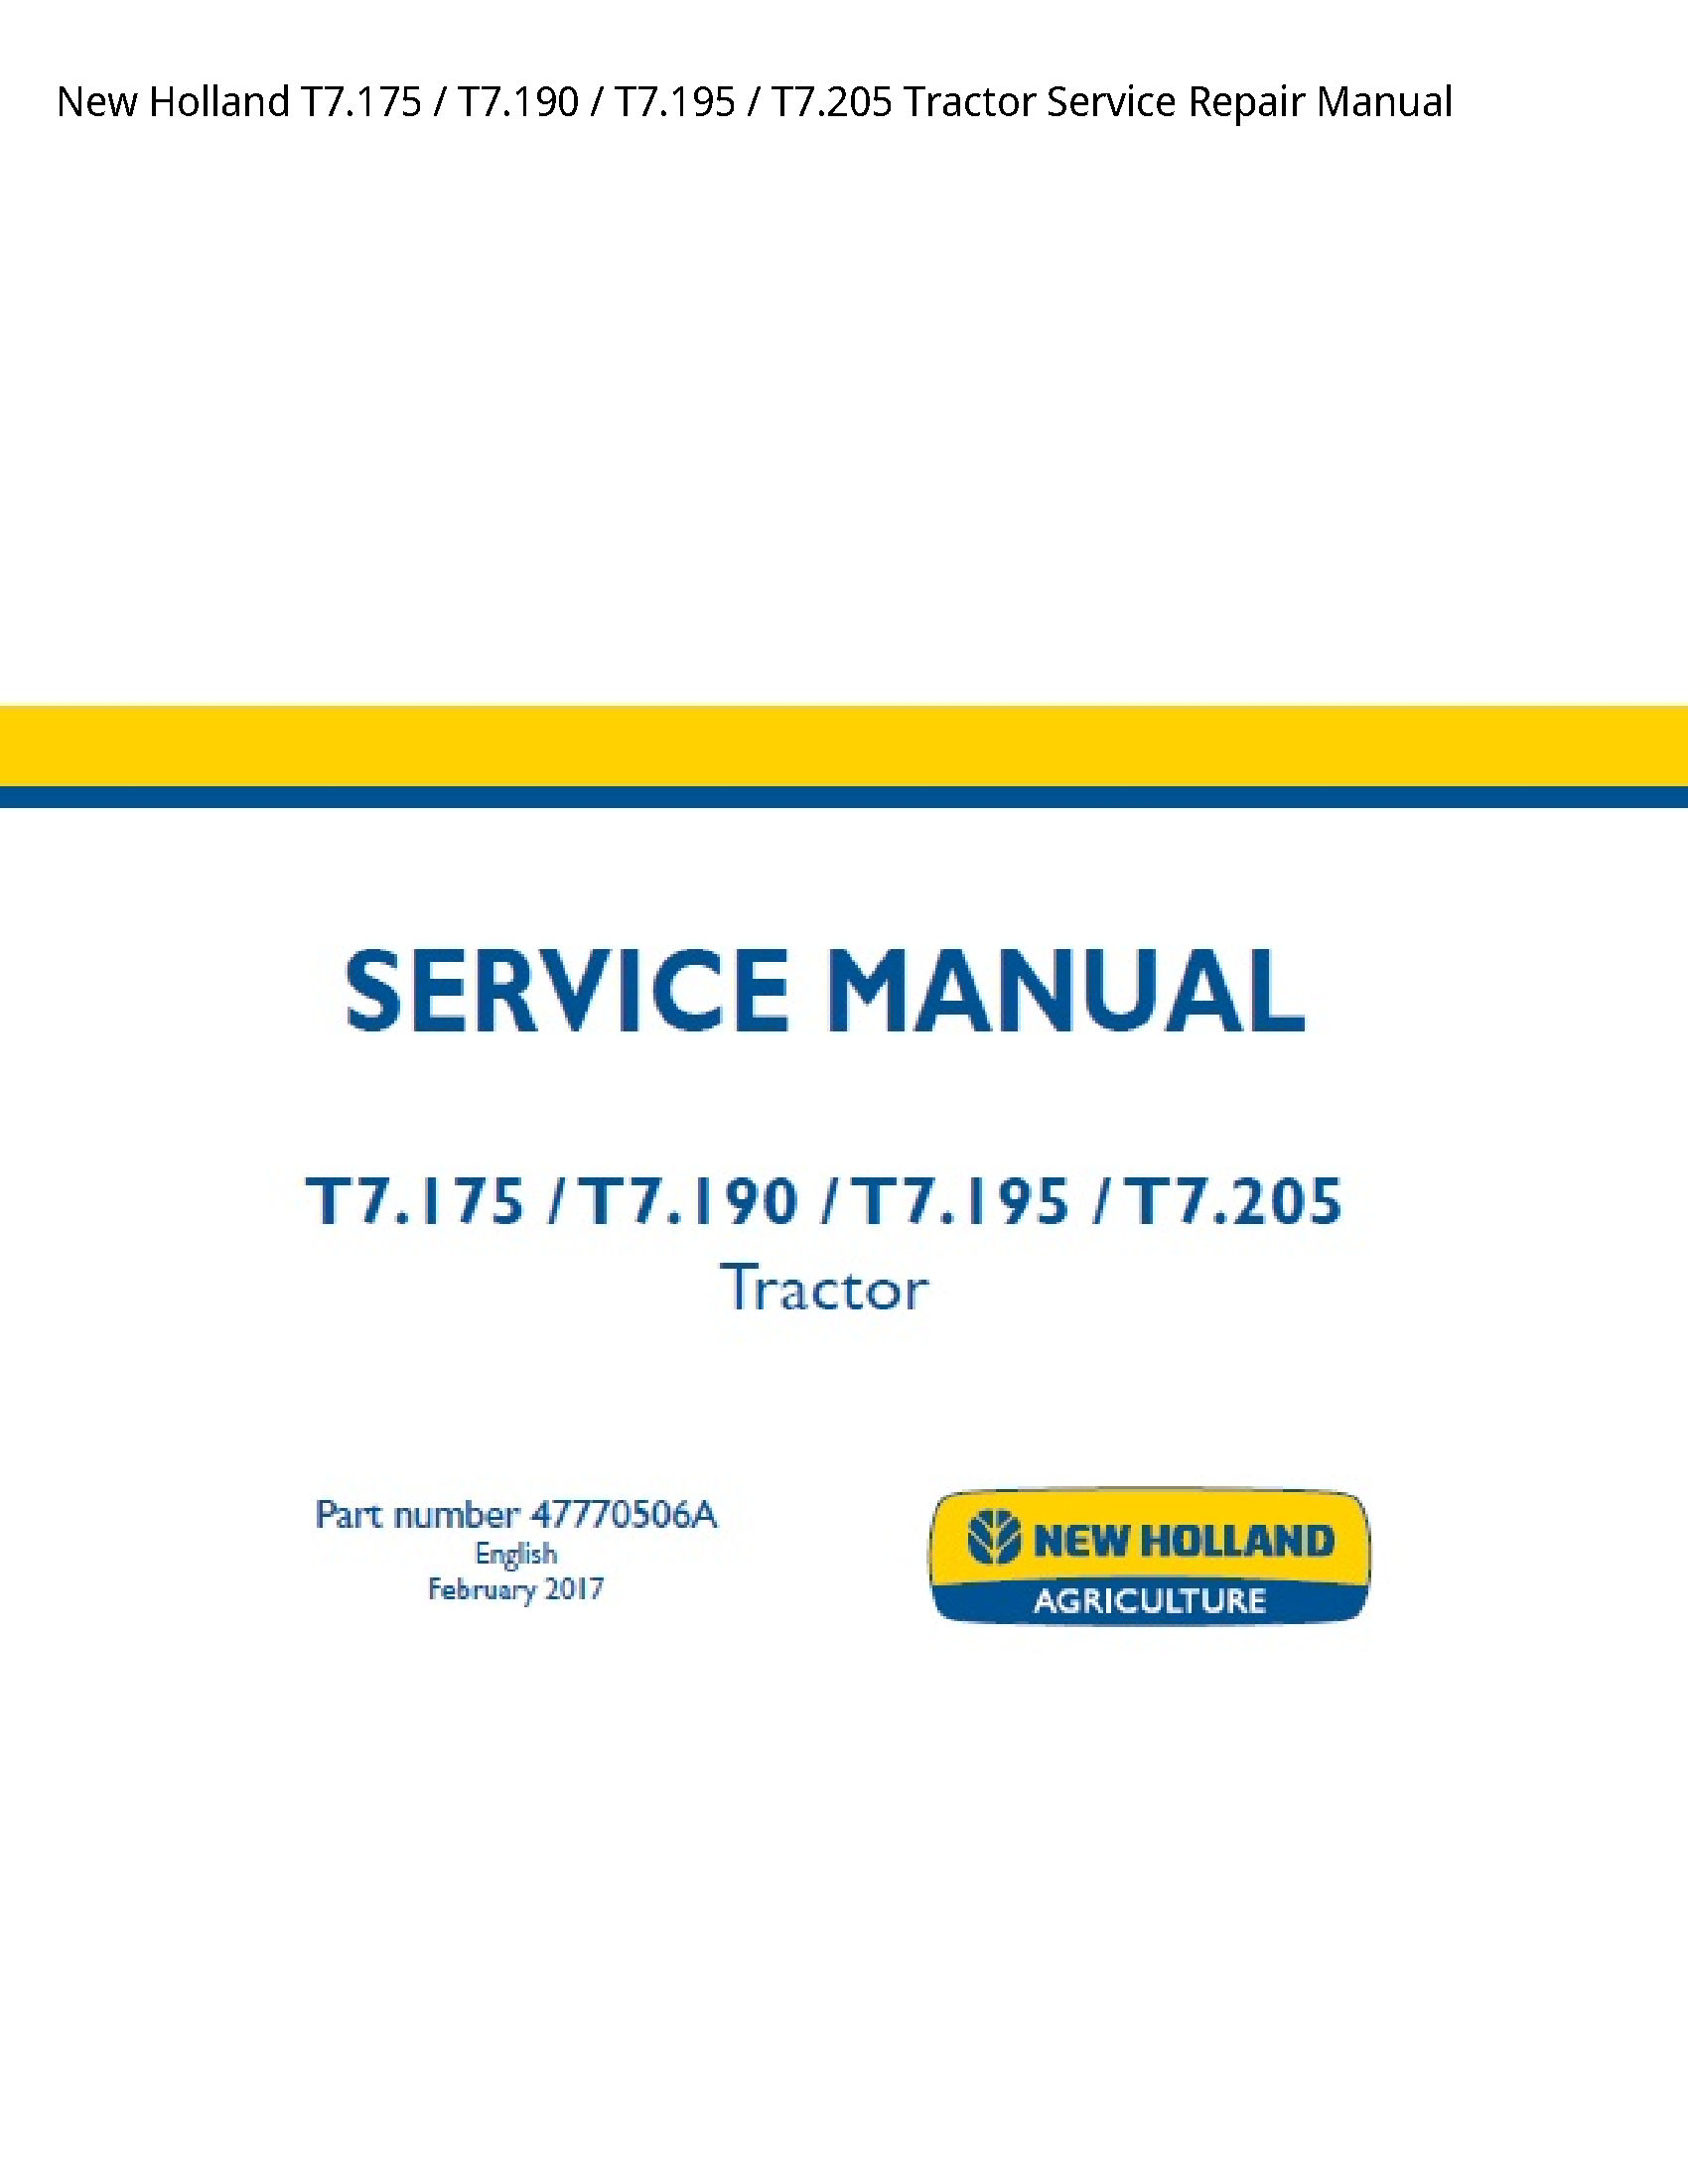 New Holland T7.175 Tractor manual